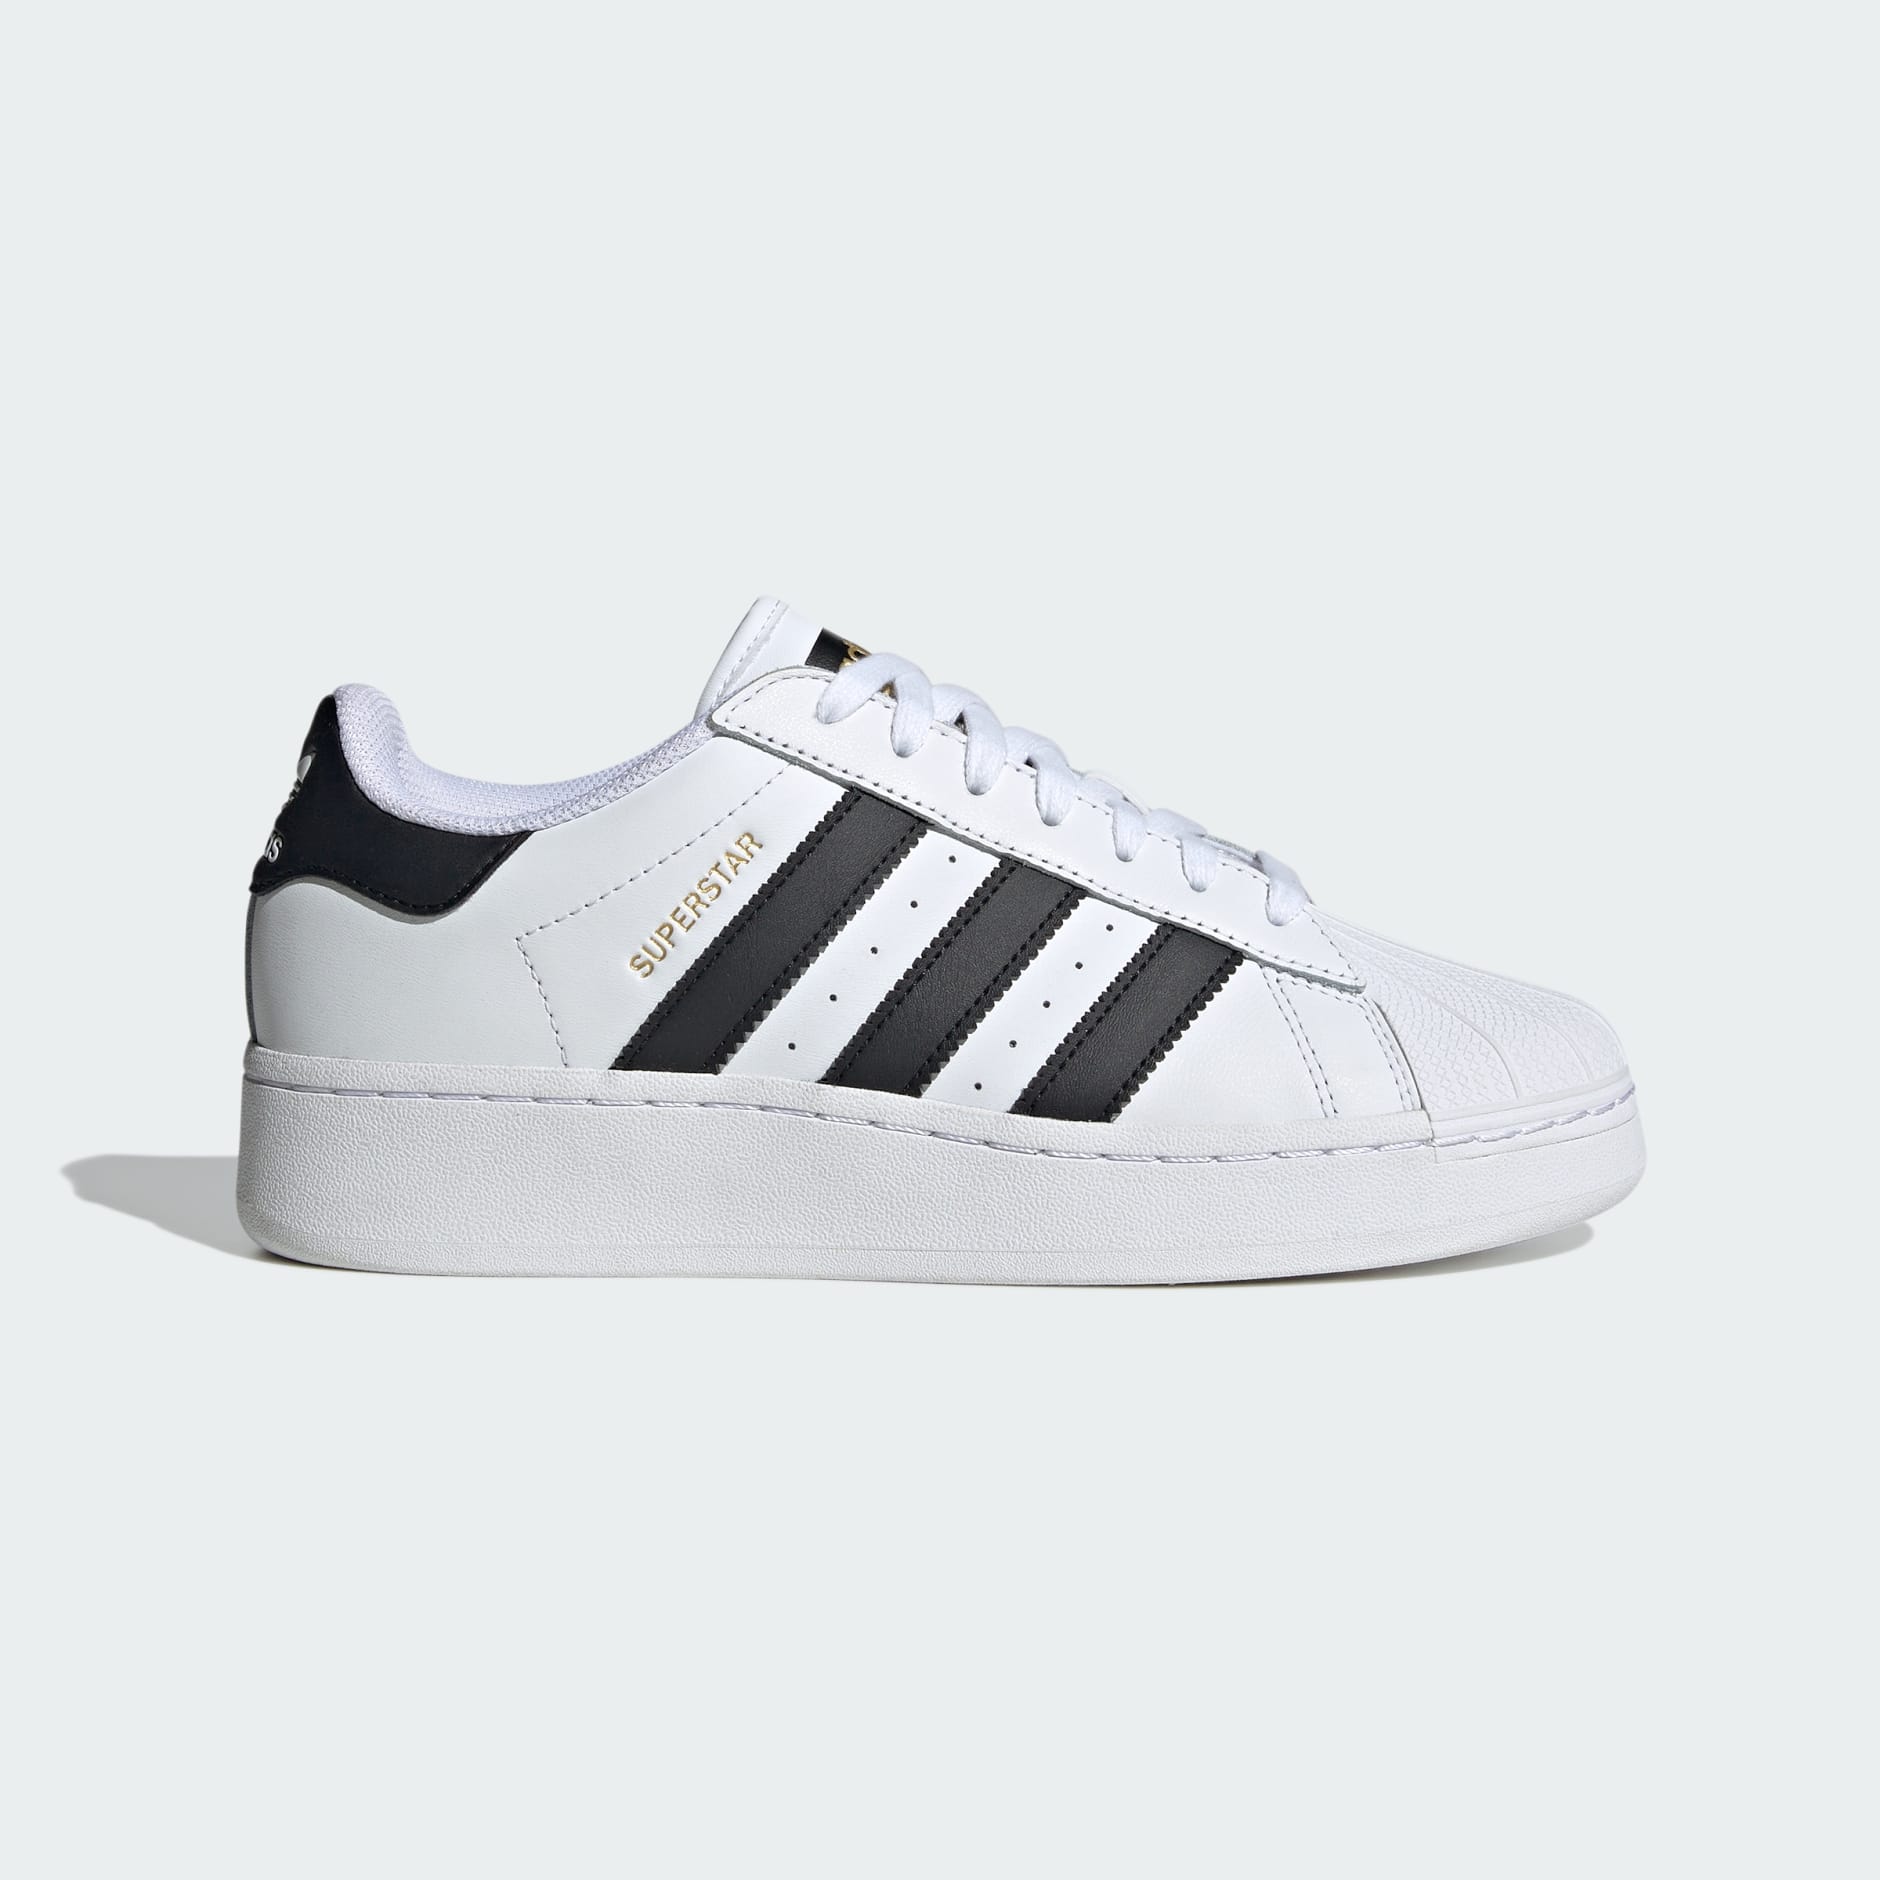 Originals Shoes - Superstar XLG Shoes - White | adidas Egypt